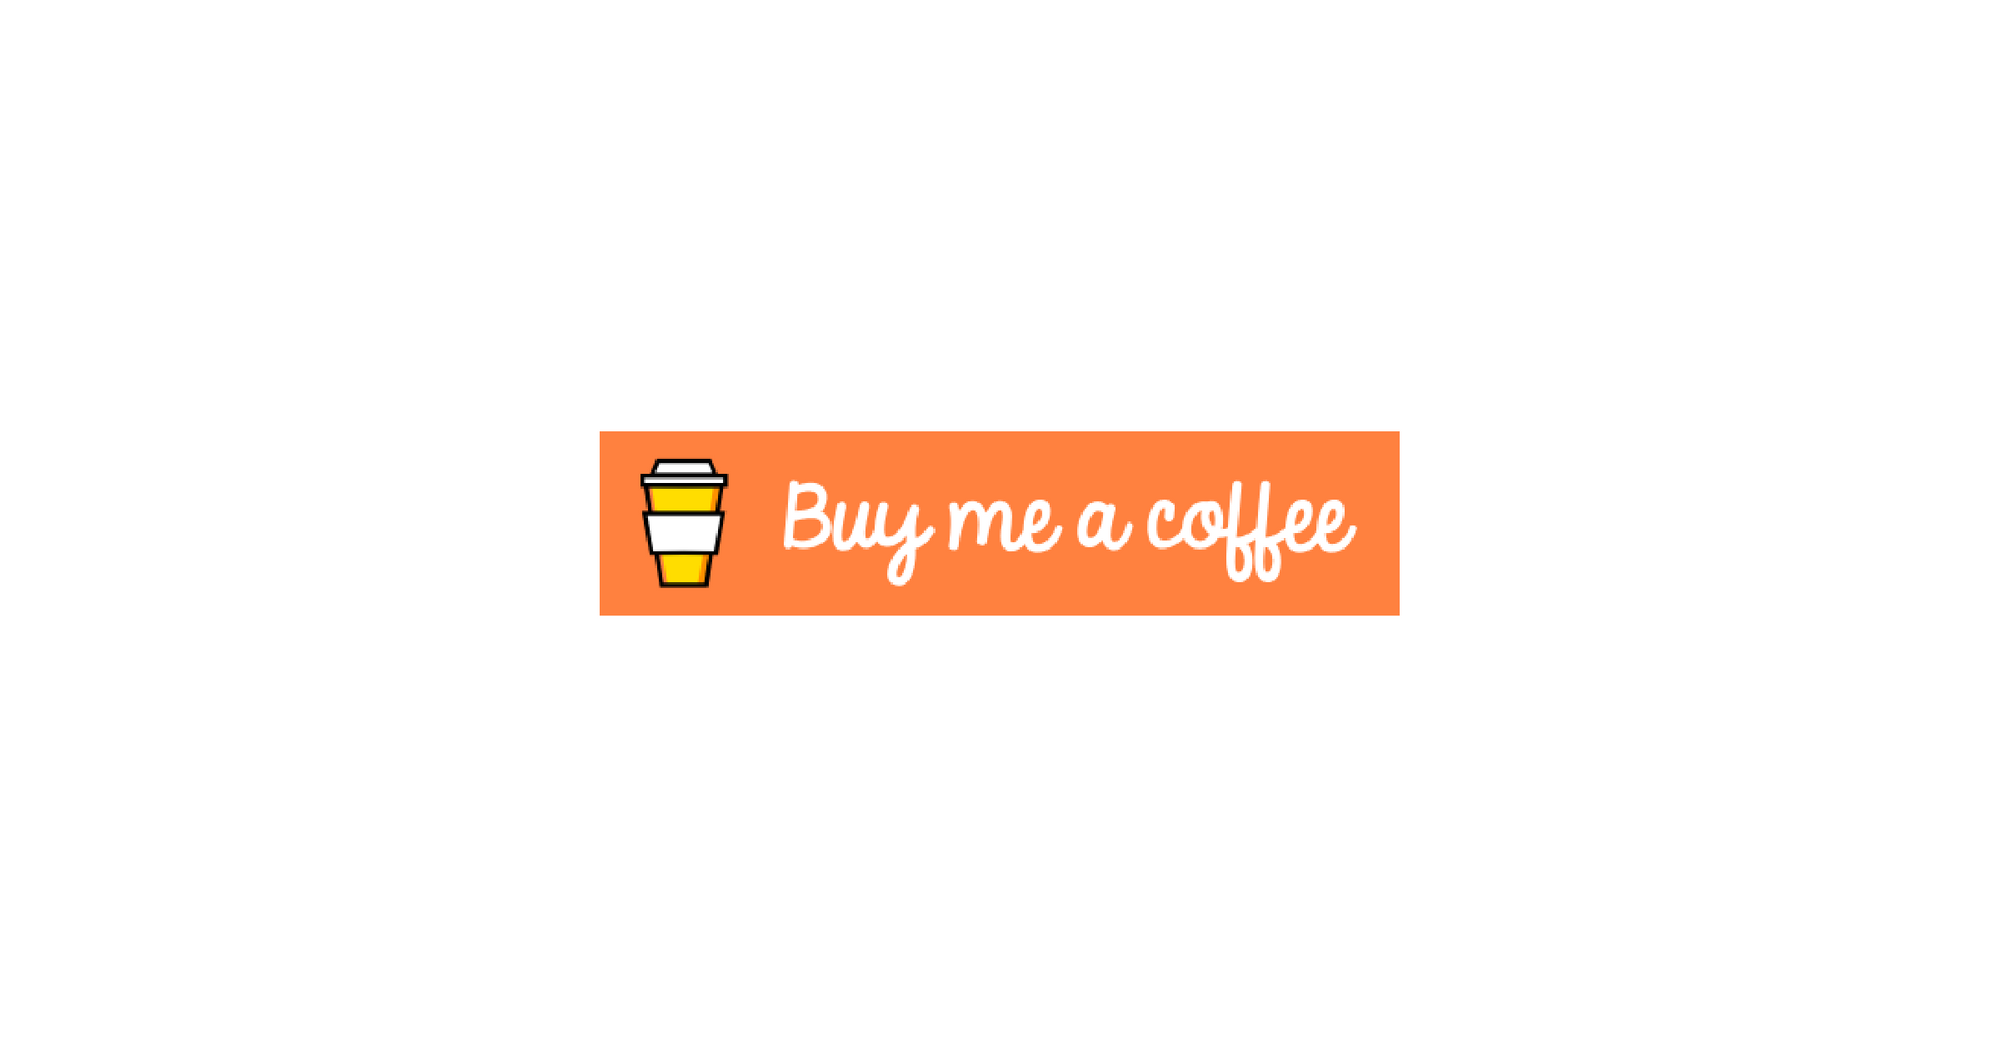 How to Add "Buy me a coffee" button to Github's README.md